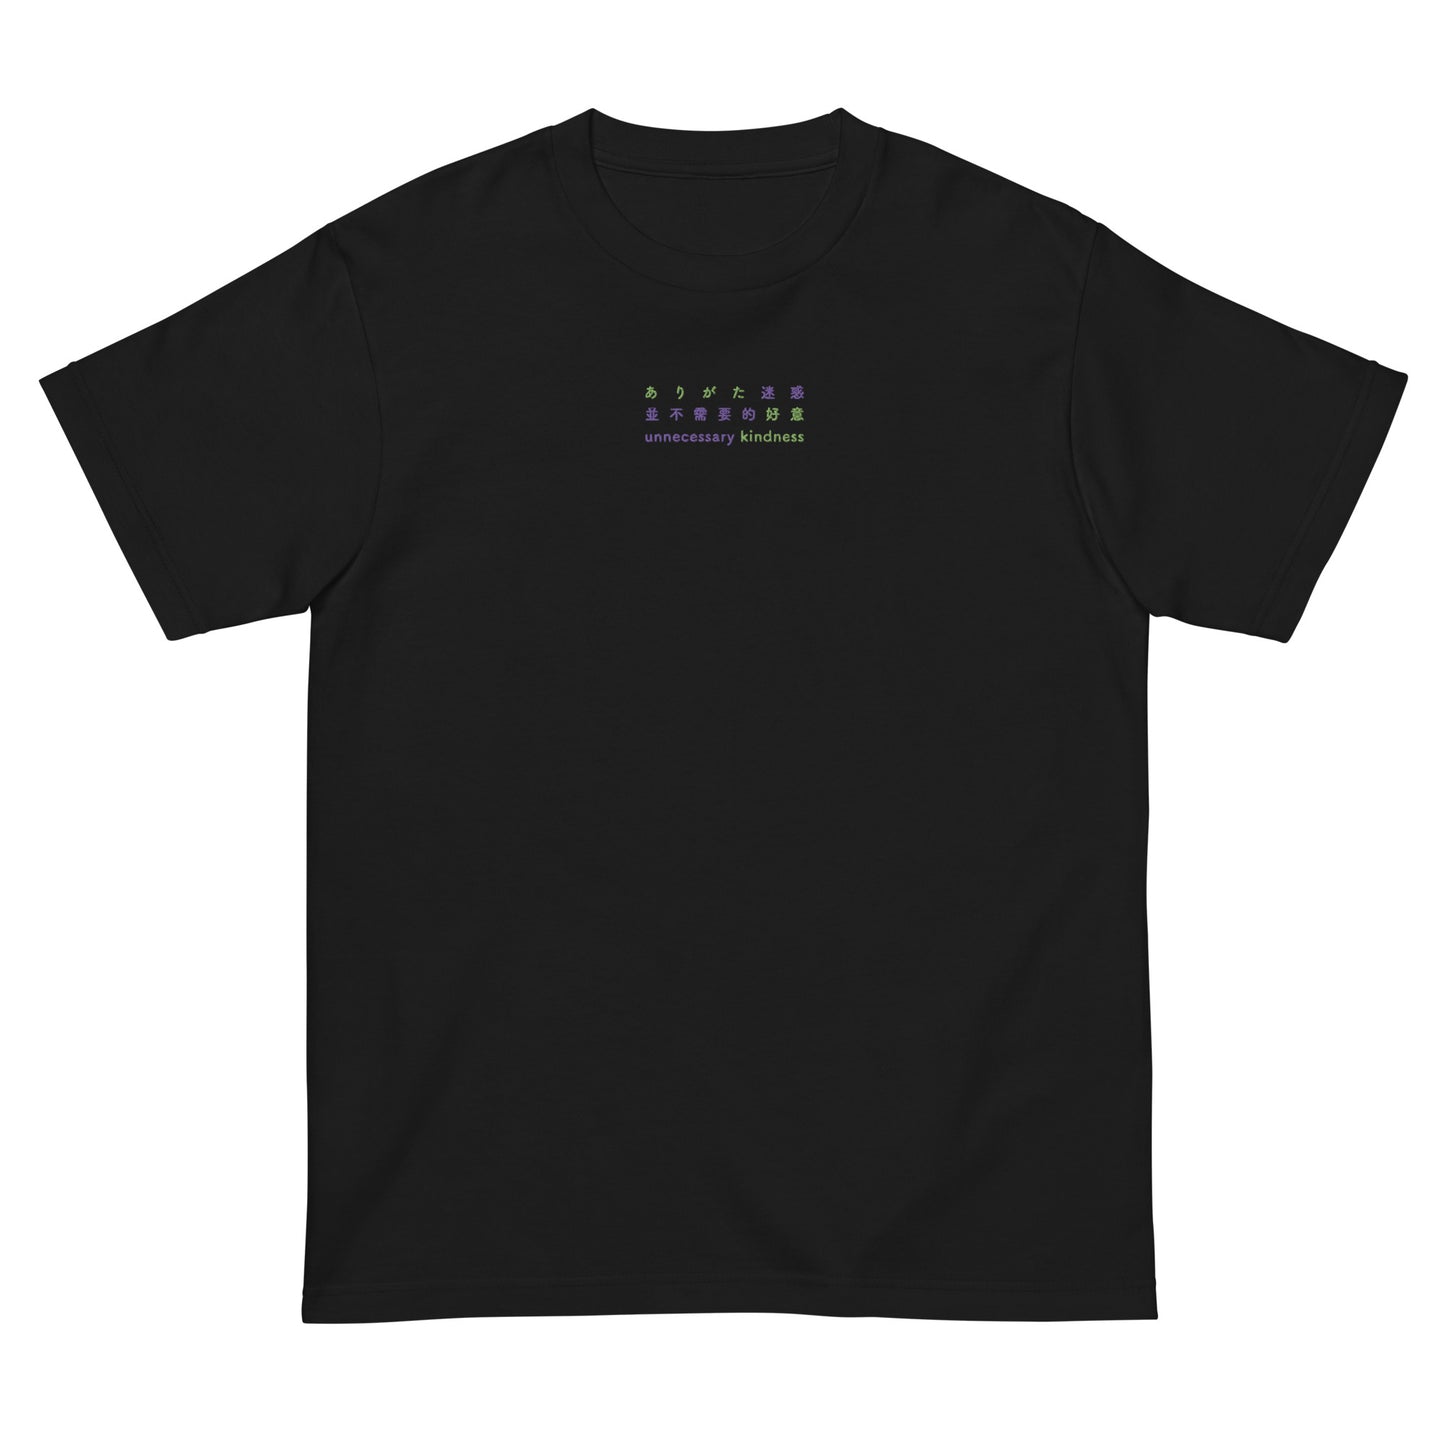 Black High Quality Tee - Front Design with Green and Purple Embroidery "Unnecessary Kindness" in Japanese ,Chinese and English